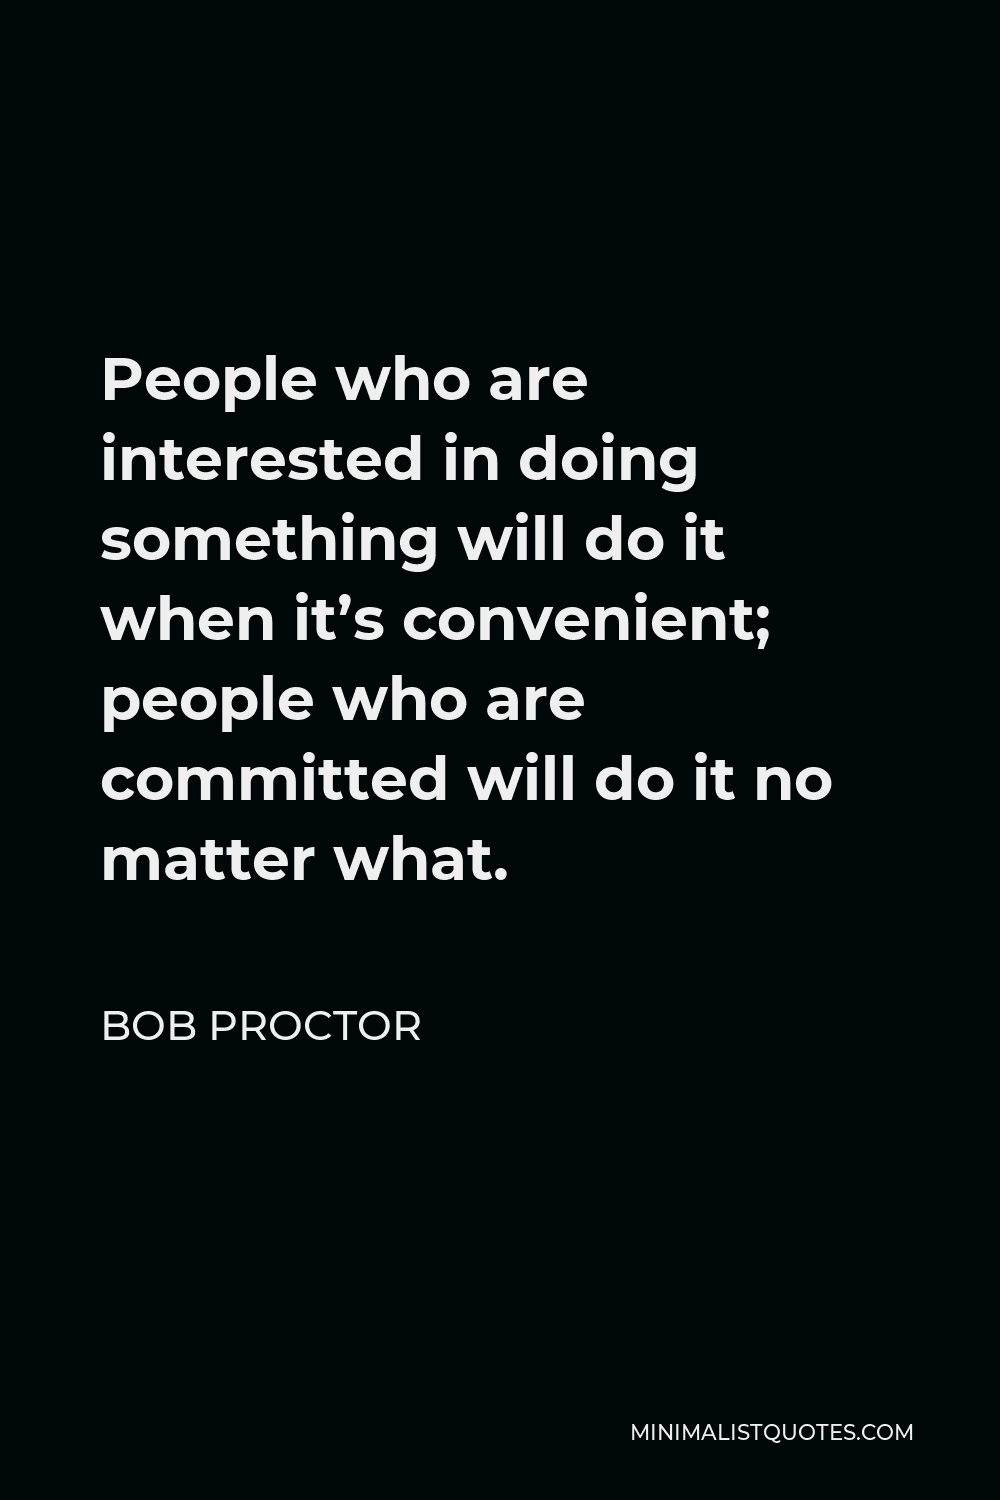 Bob Proctor Quote - People who are interested in doing something will do it when it’s convenient; people who are committed will do it no matter what.